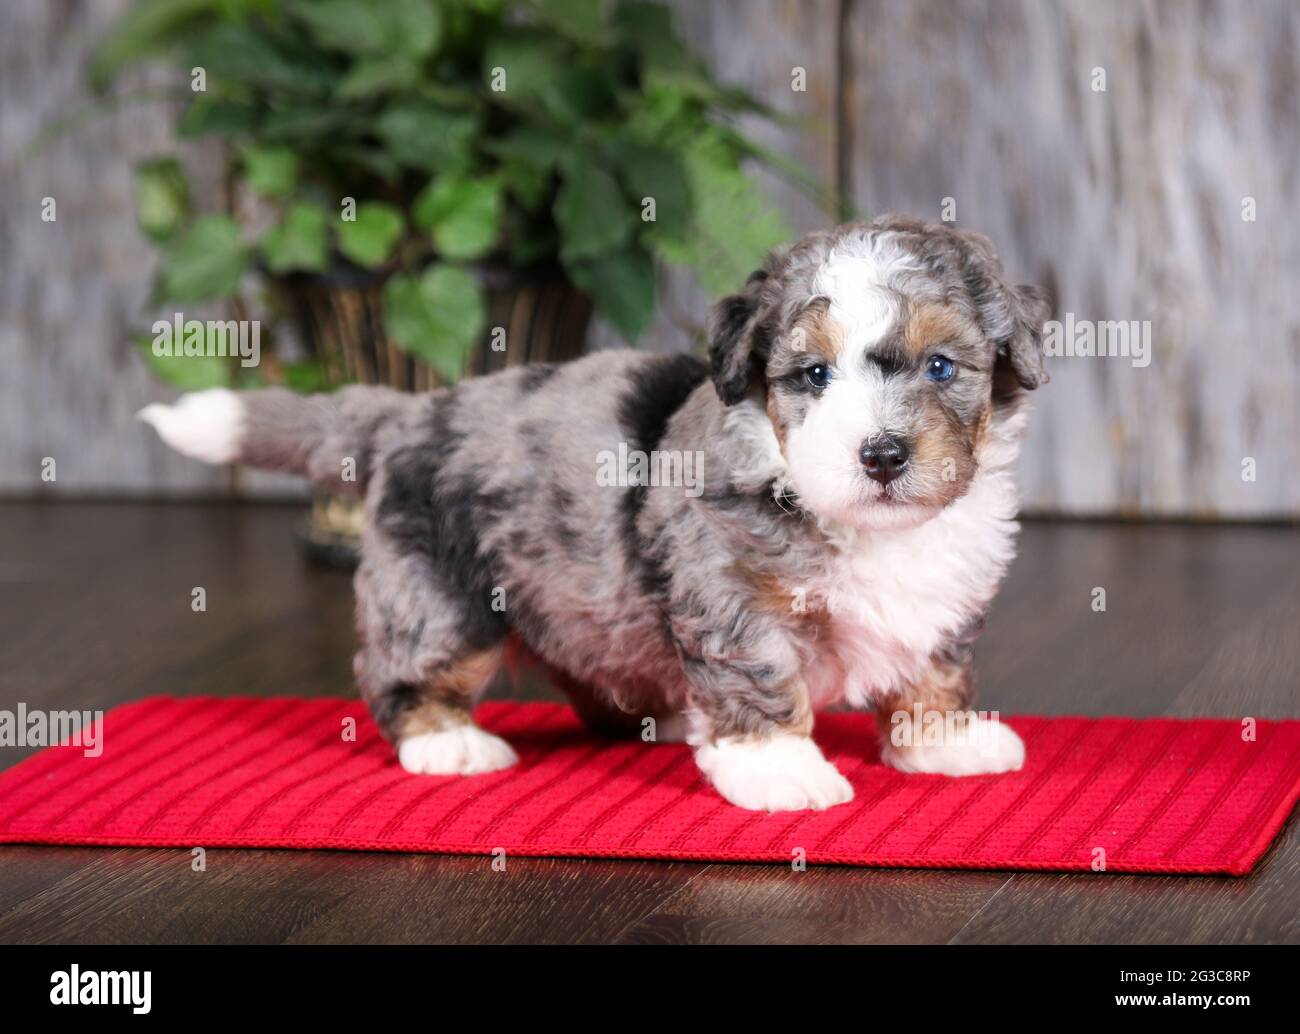 F2 Mini Bernedoodle puppy looking at camera at 5 weeks old. Standing on red towel mat. Stock Photo